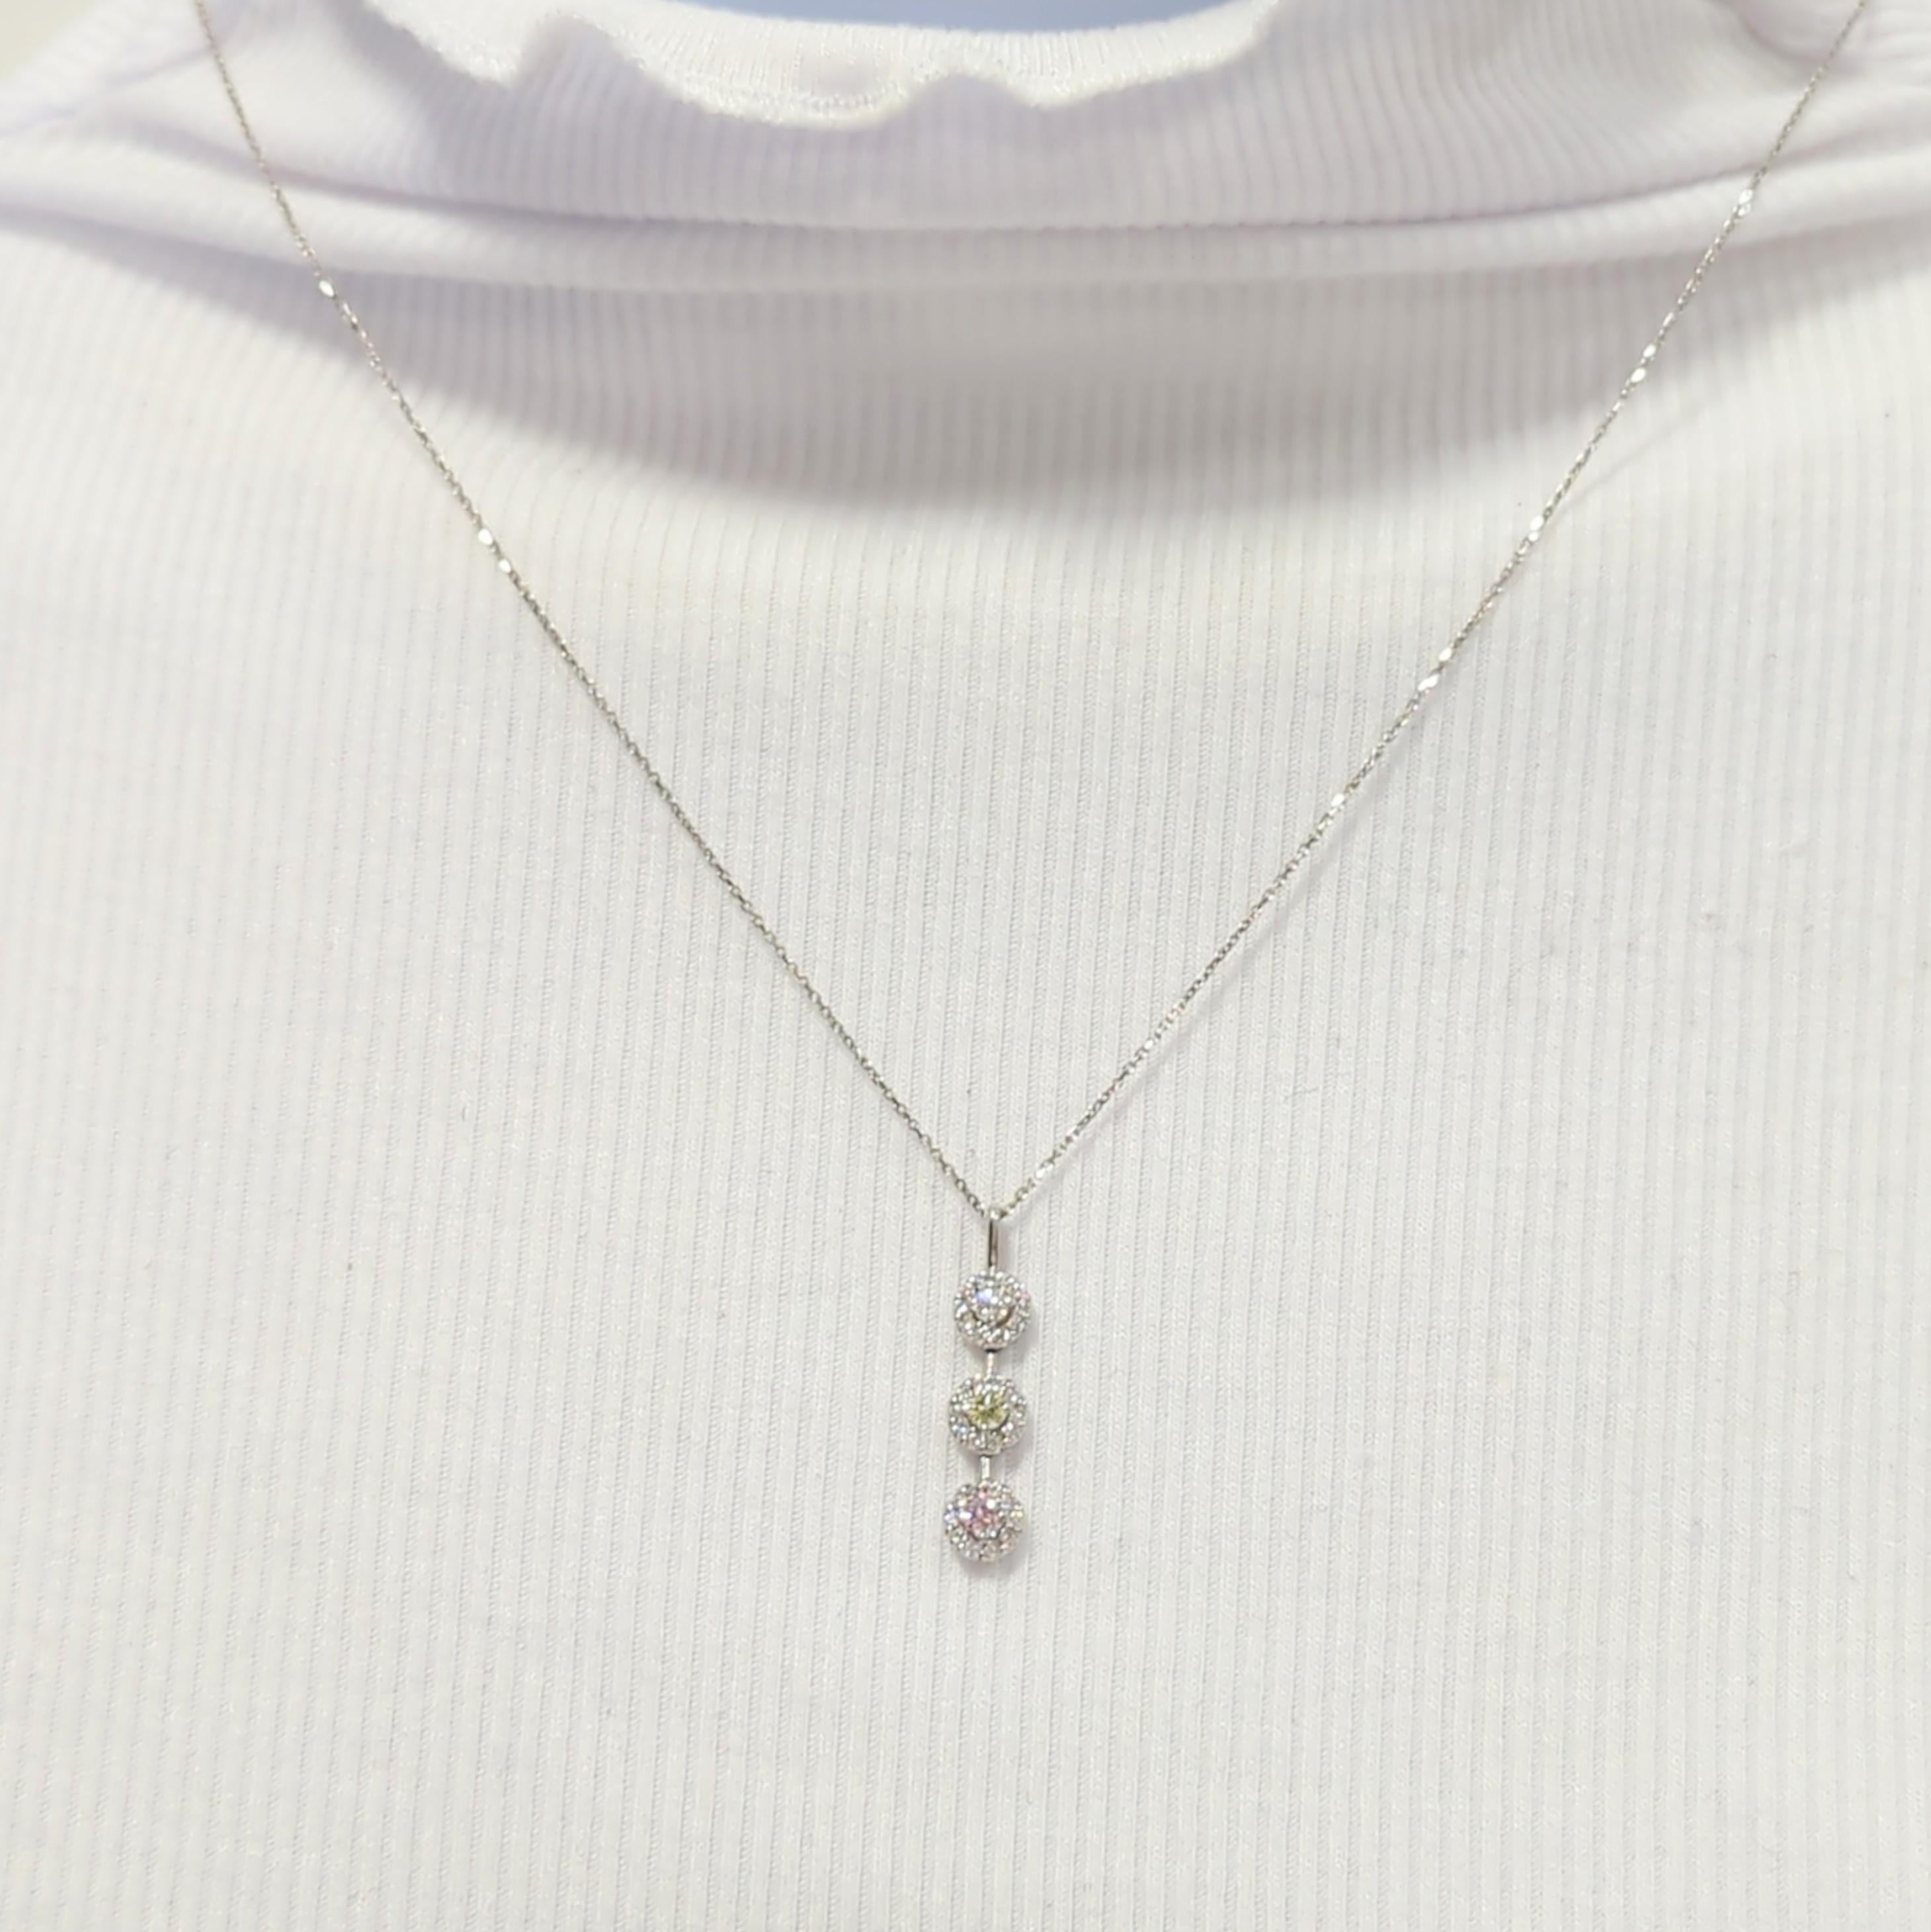 Beautiful 0.47 ct. multicolor round diamonds in this pendant necklace.  Handmade in 18k white gold.  Length is 18